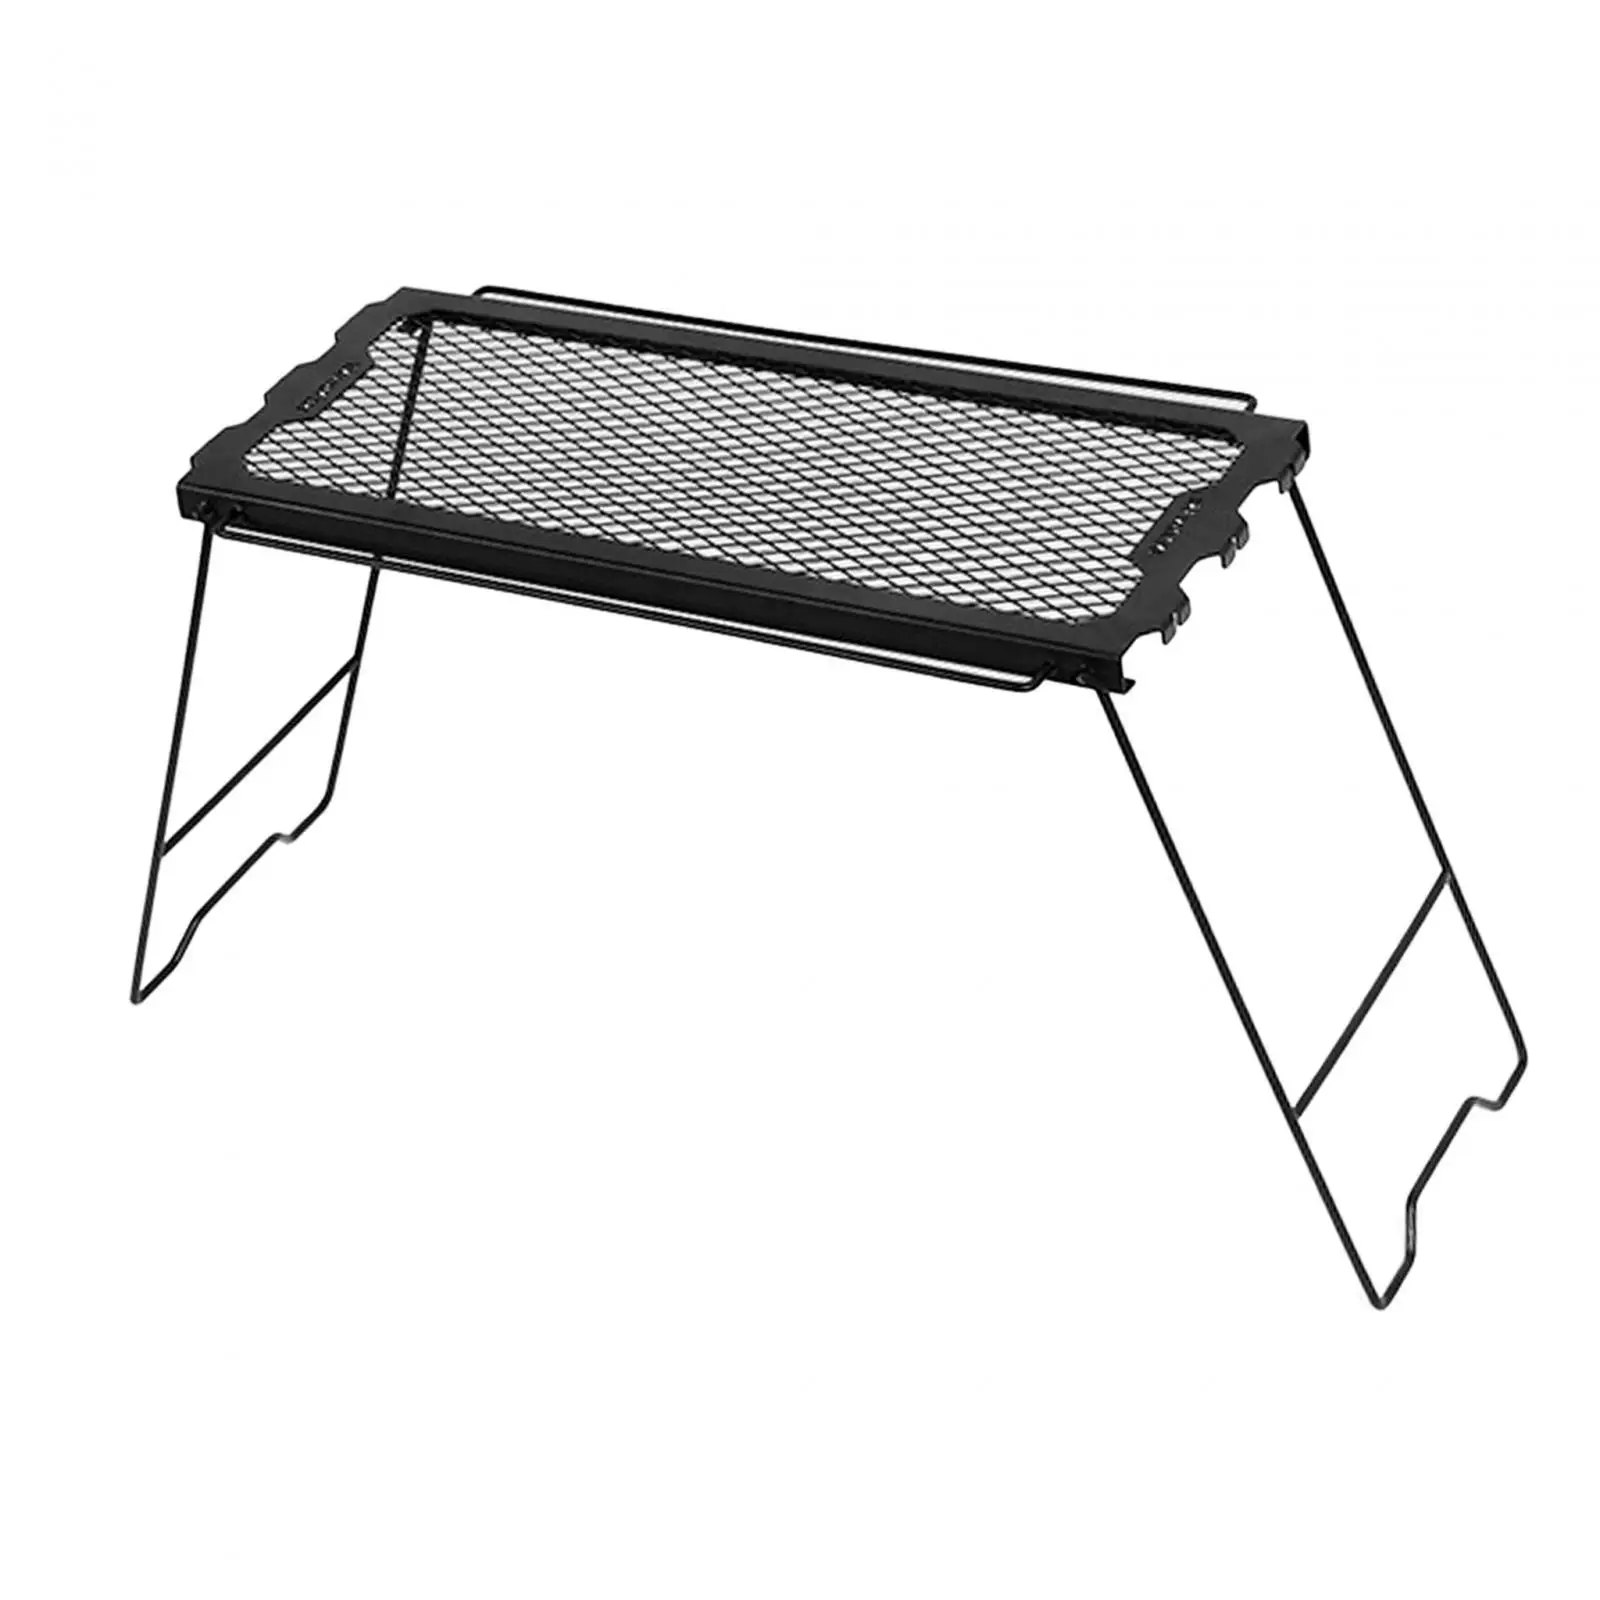 Folding Camping Table Camping Cooking Grate Outdoor Heavy Duty Folding Campfire Grill Small Table for Backpacking RV BBQ